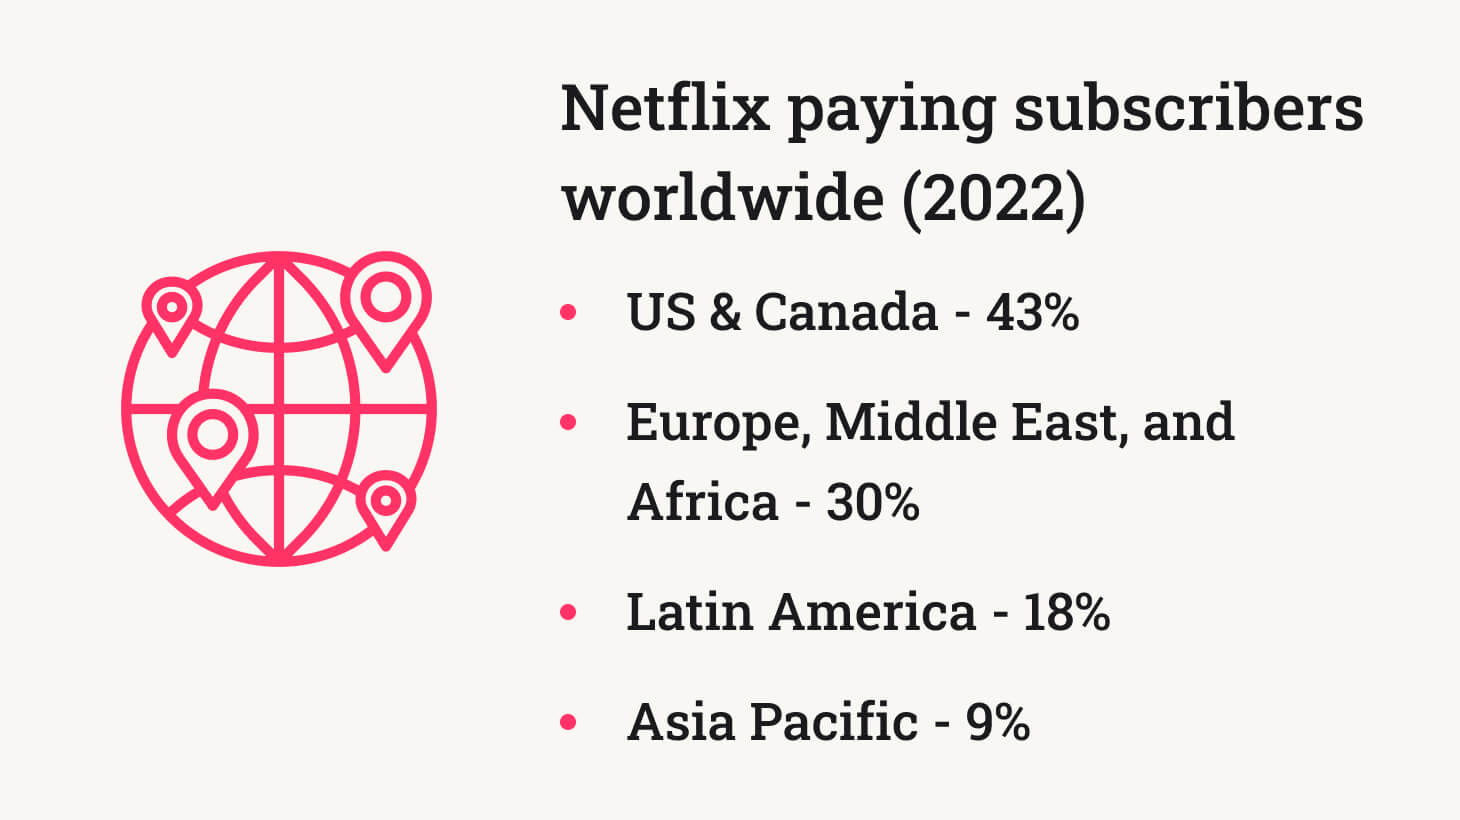 The picture shows the distribution of Netflix subscribers by world regions.